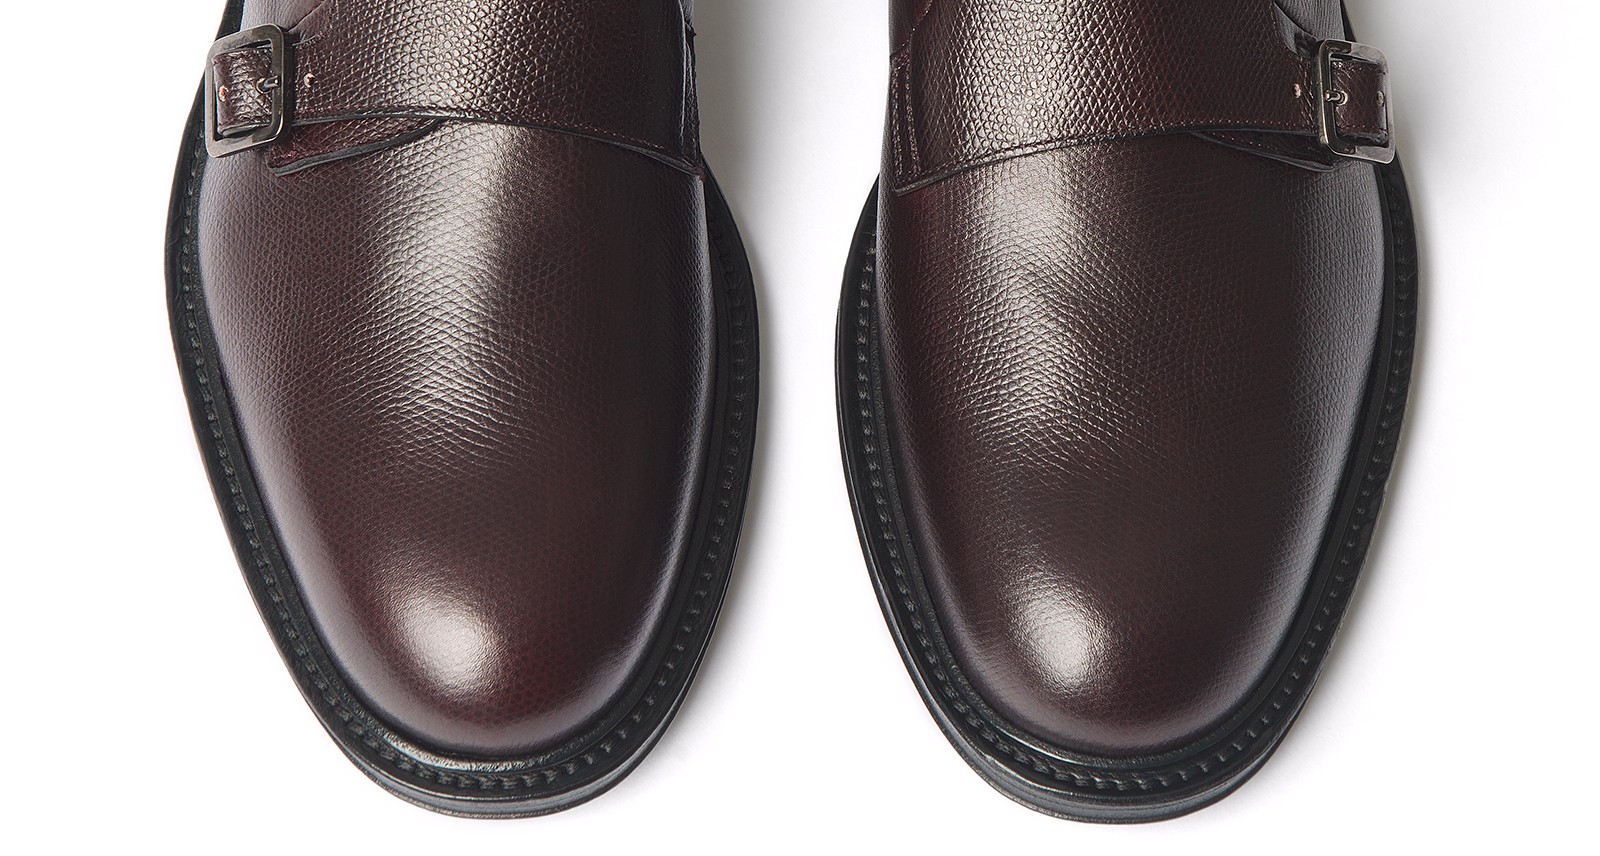  Every  Man  Should  Own  These Endlessly Versatile Just About 